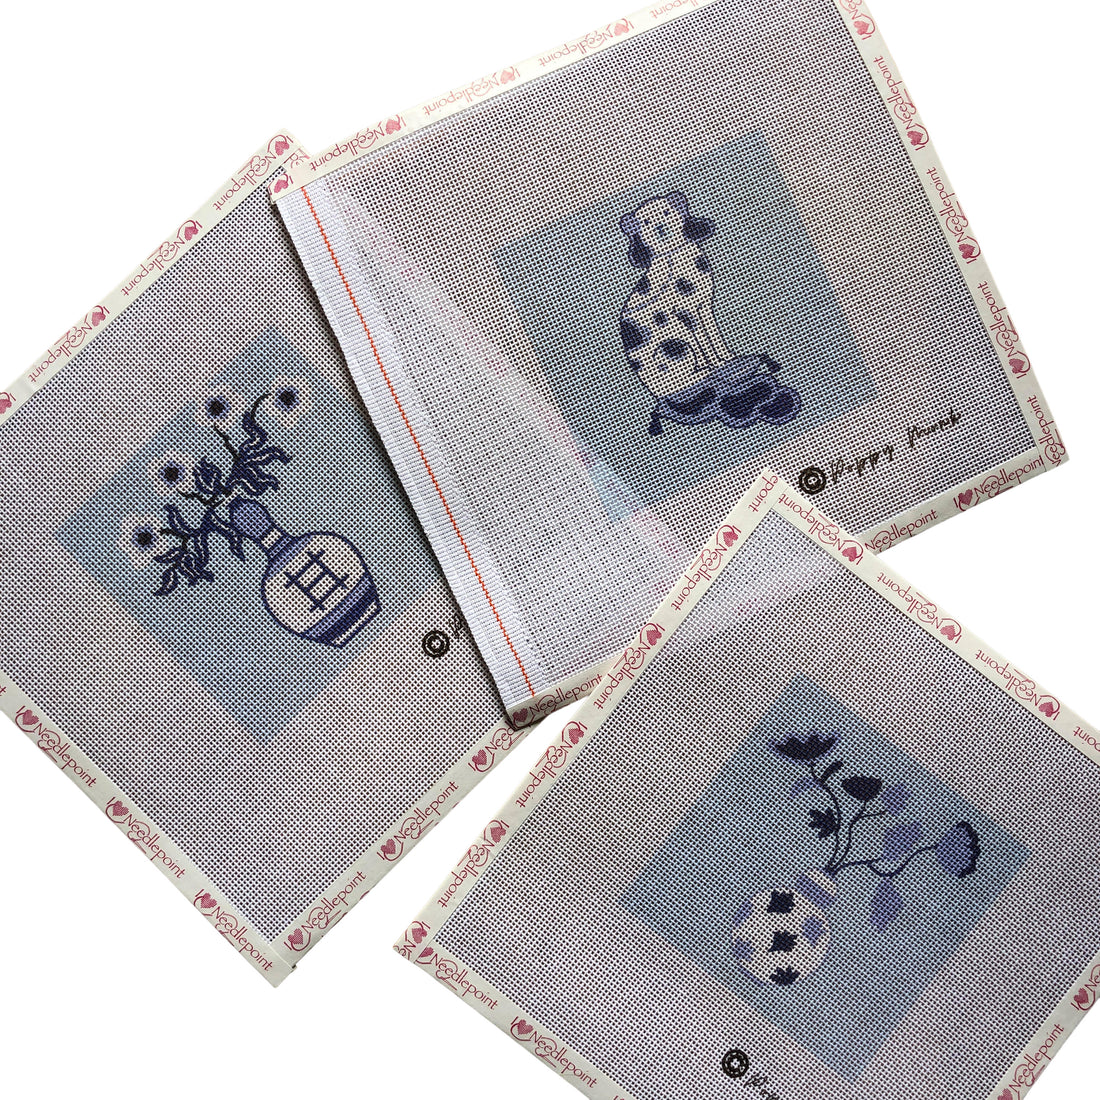 Blue and white needlepoint designs inspired by Chinoiserie.